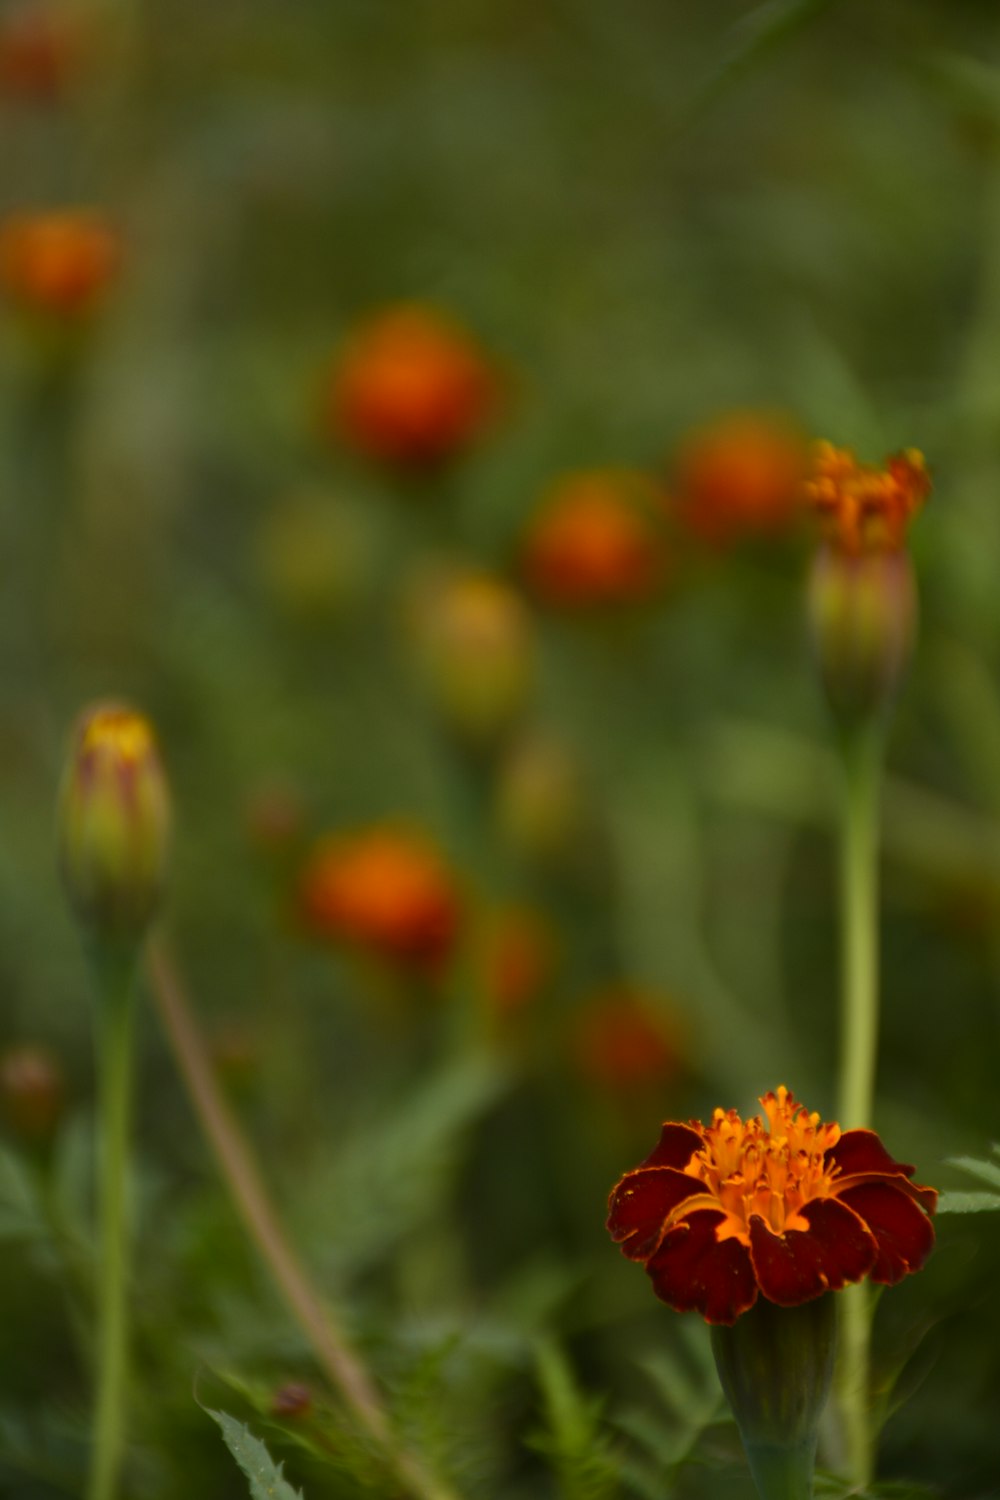 a close up of a flower in a field of flowers